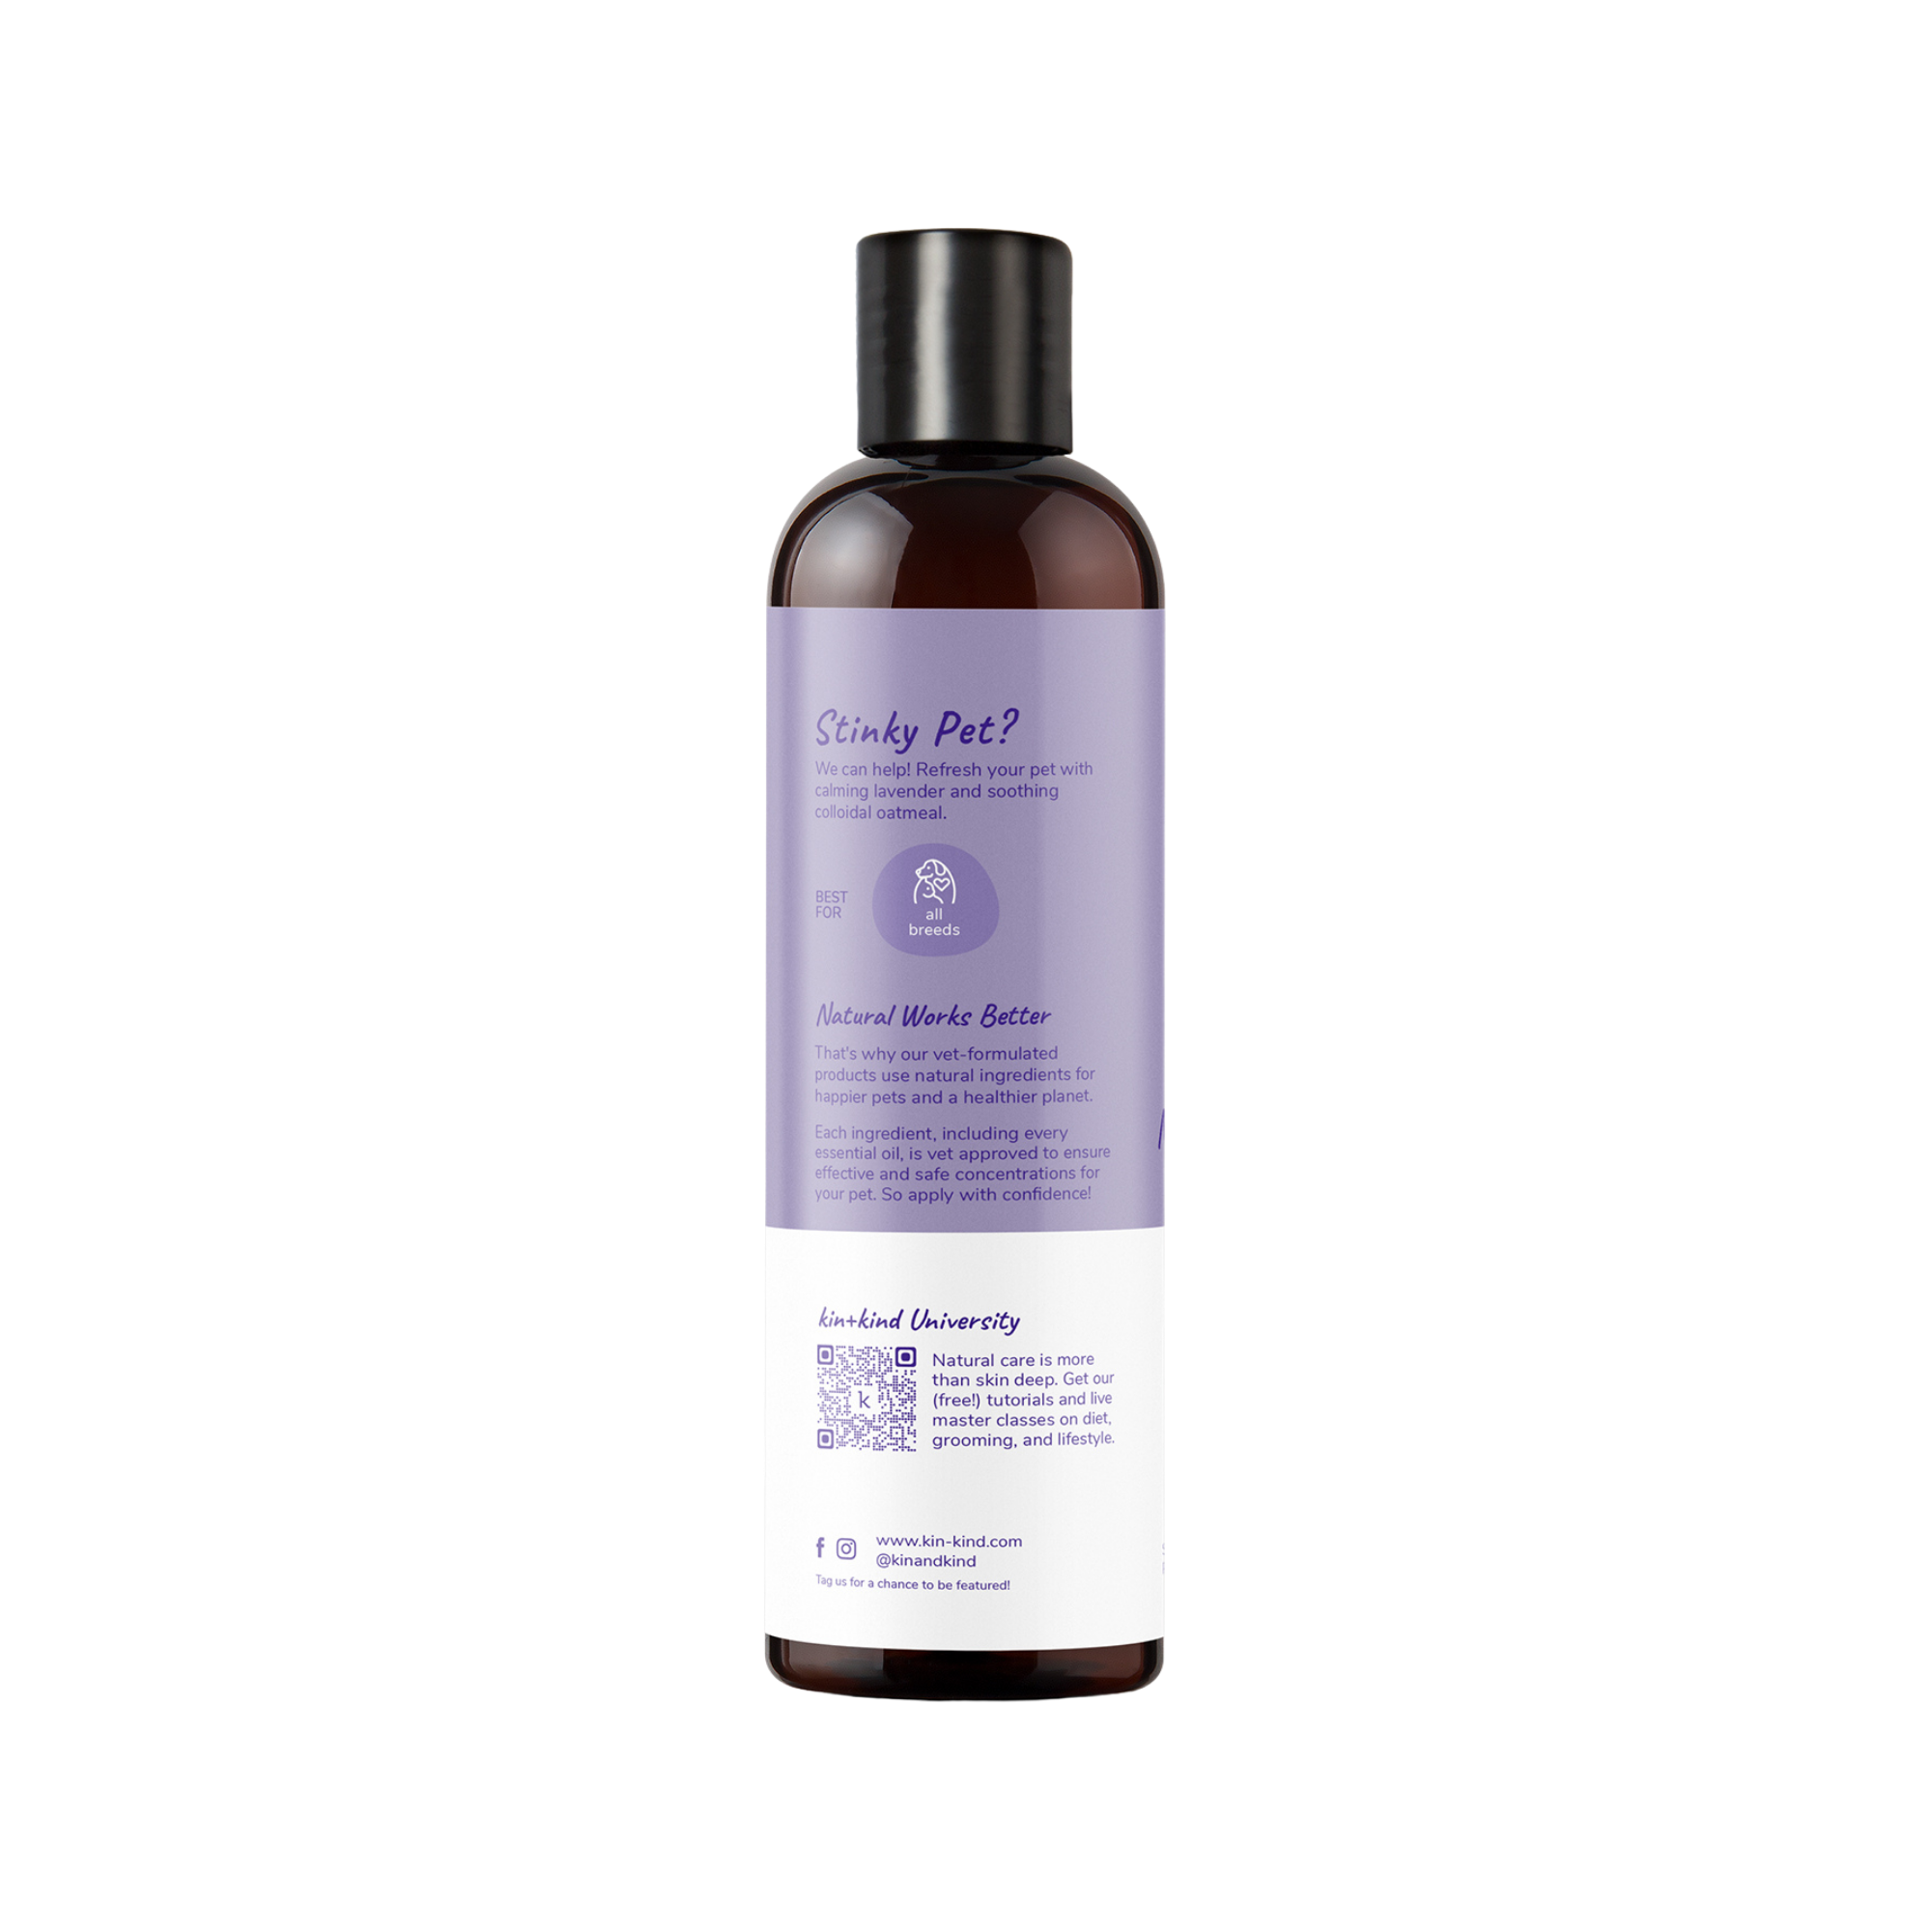 Kin+Kind Oatmeal Natural Shampoo for Dogs & Cats Lavender, 12 oz - Mutts & Co.